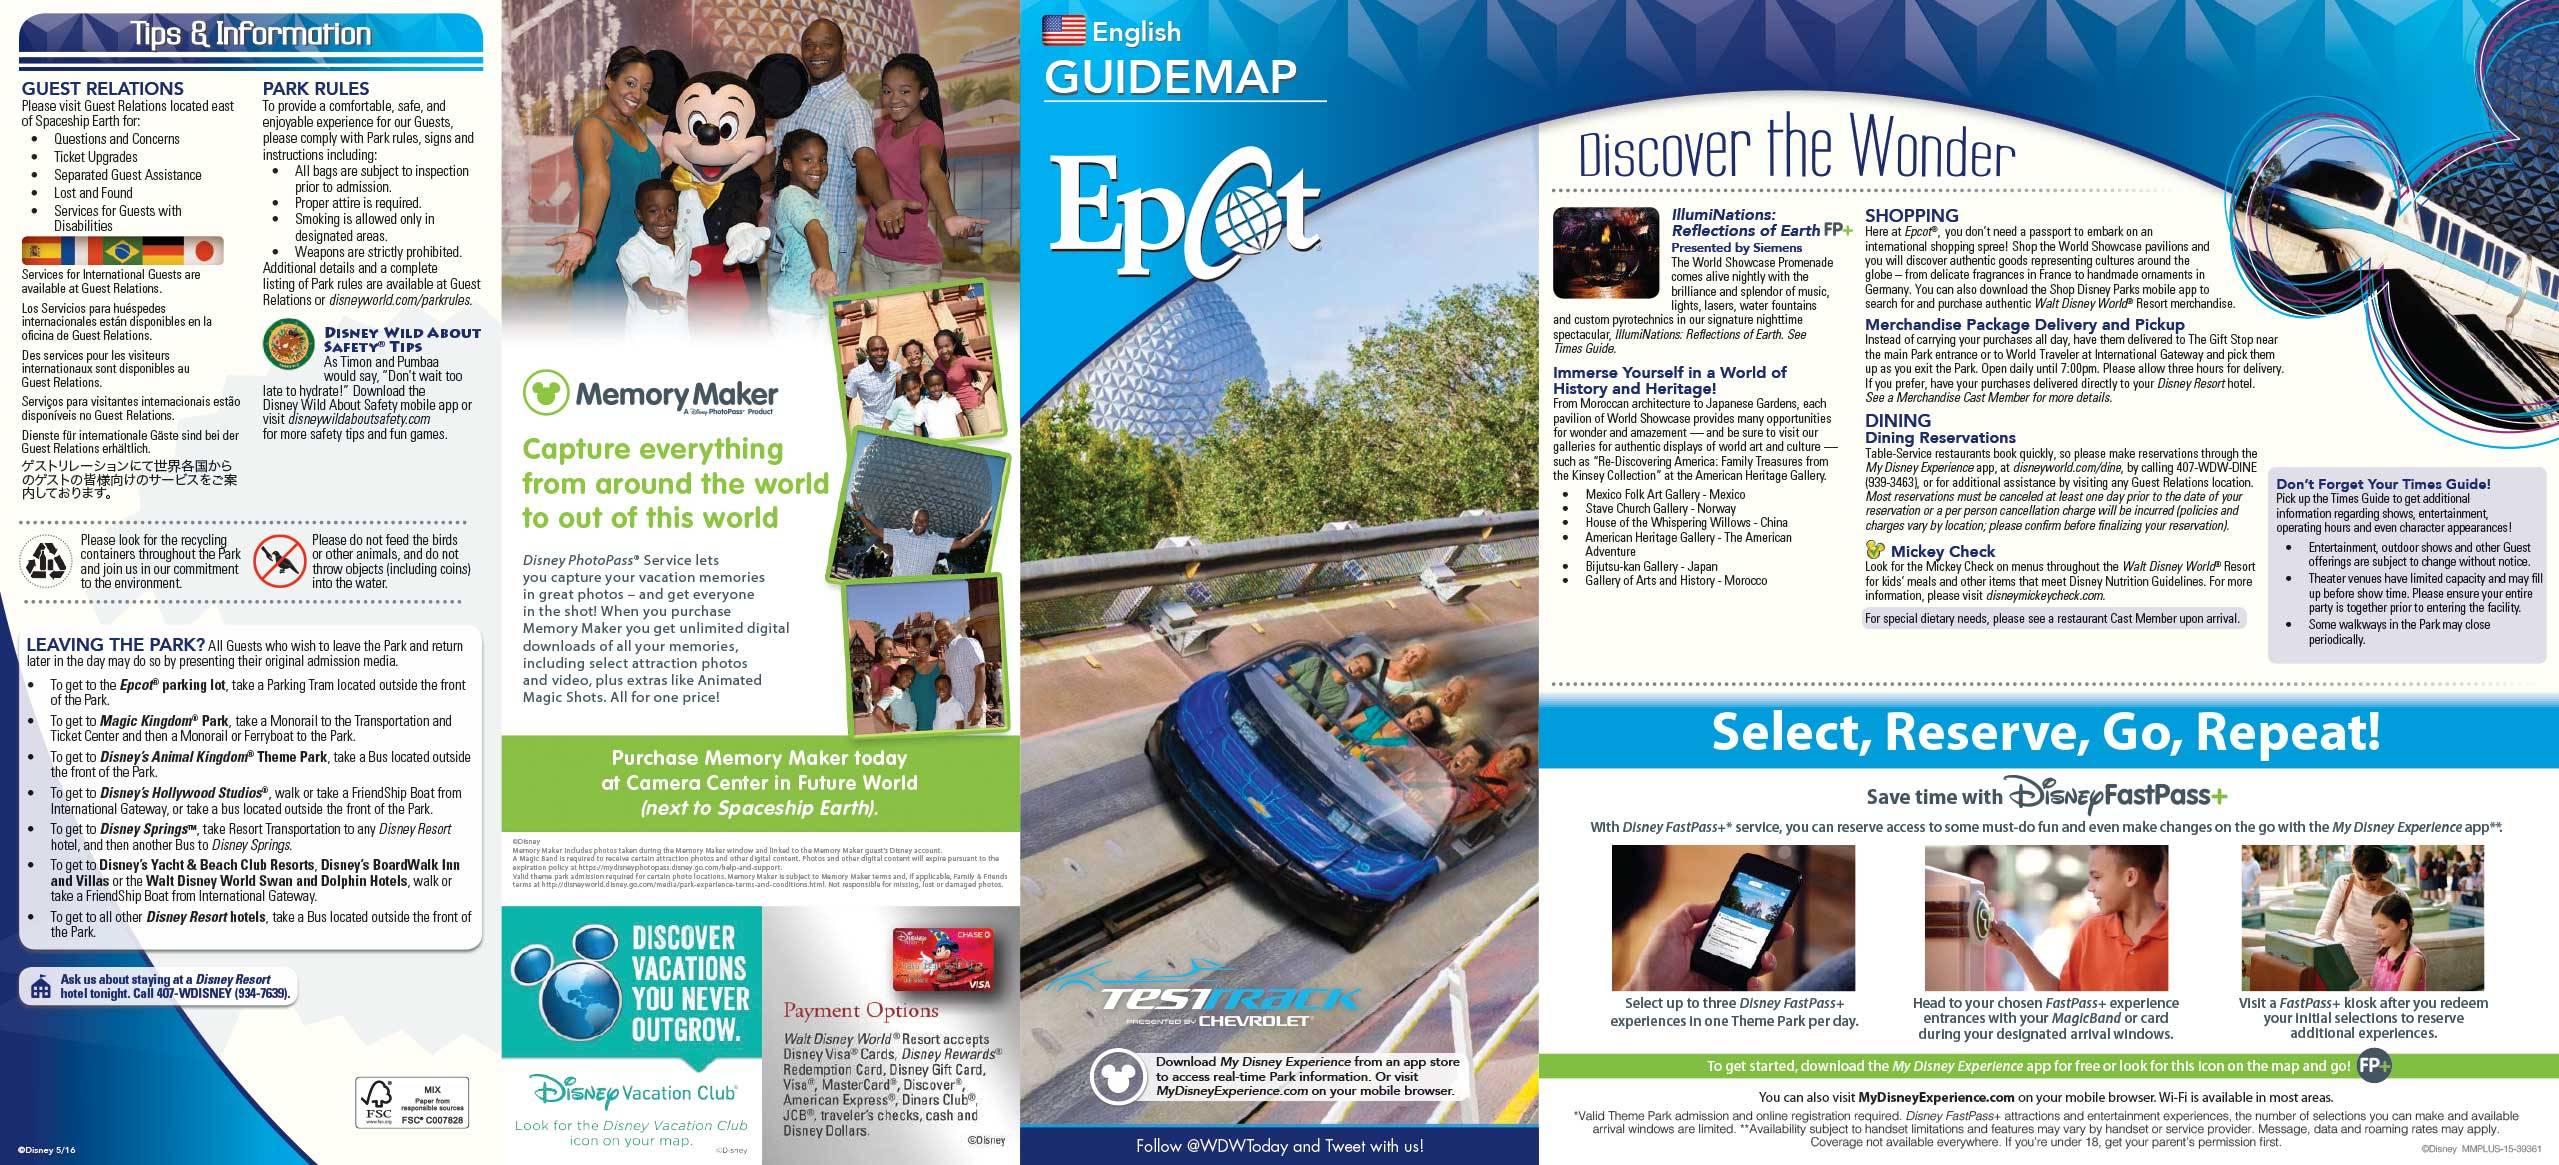 Epcot Guide Map May 2016 - Front